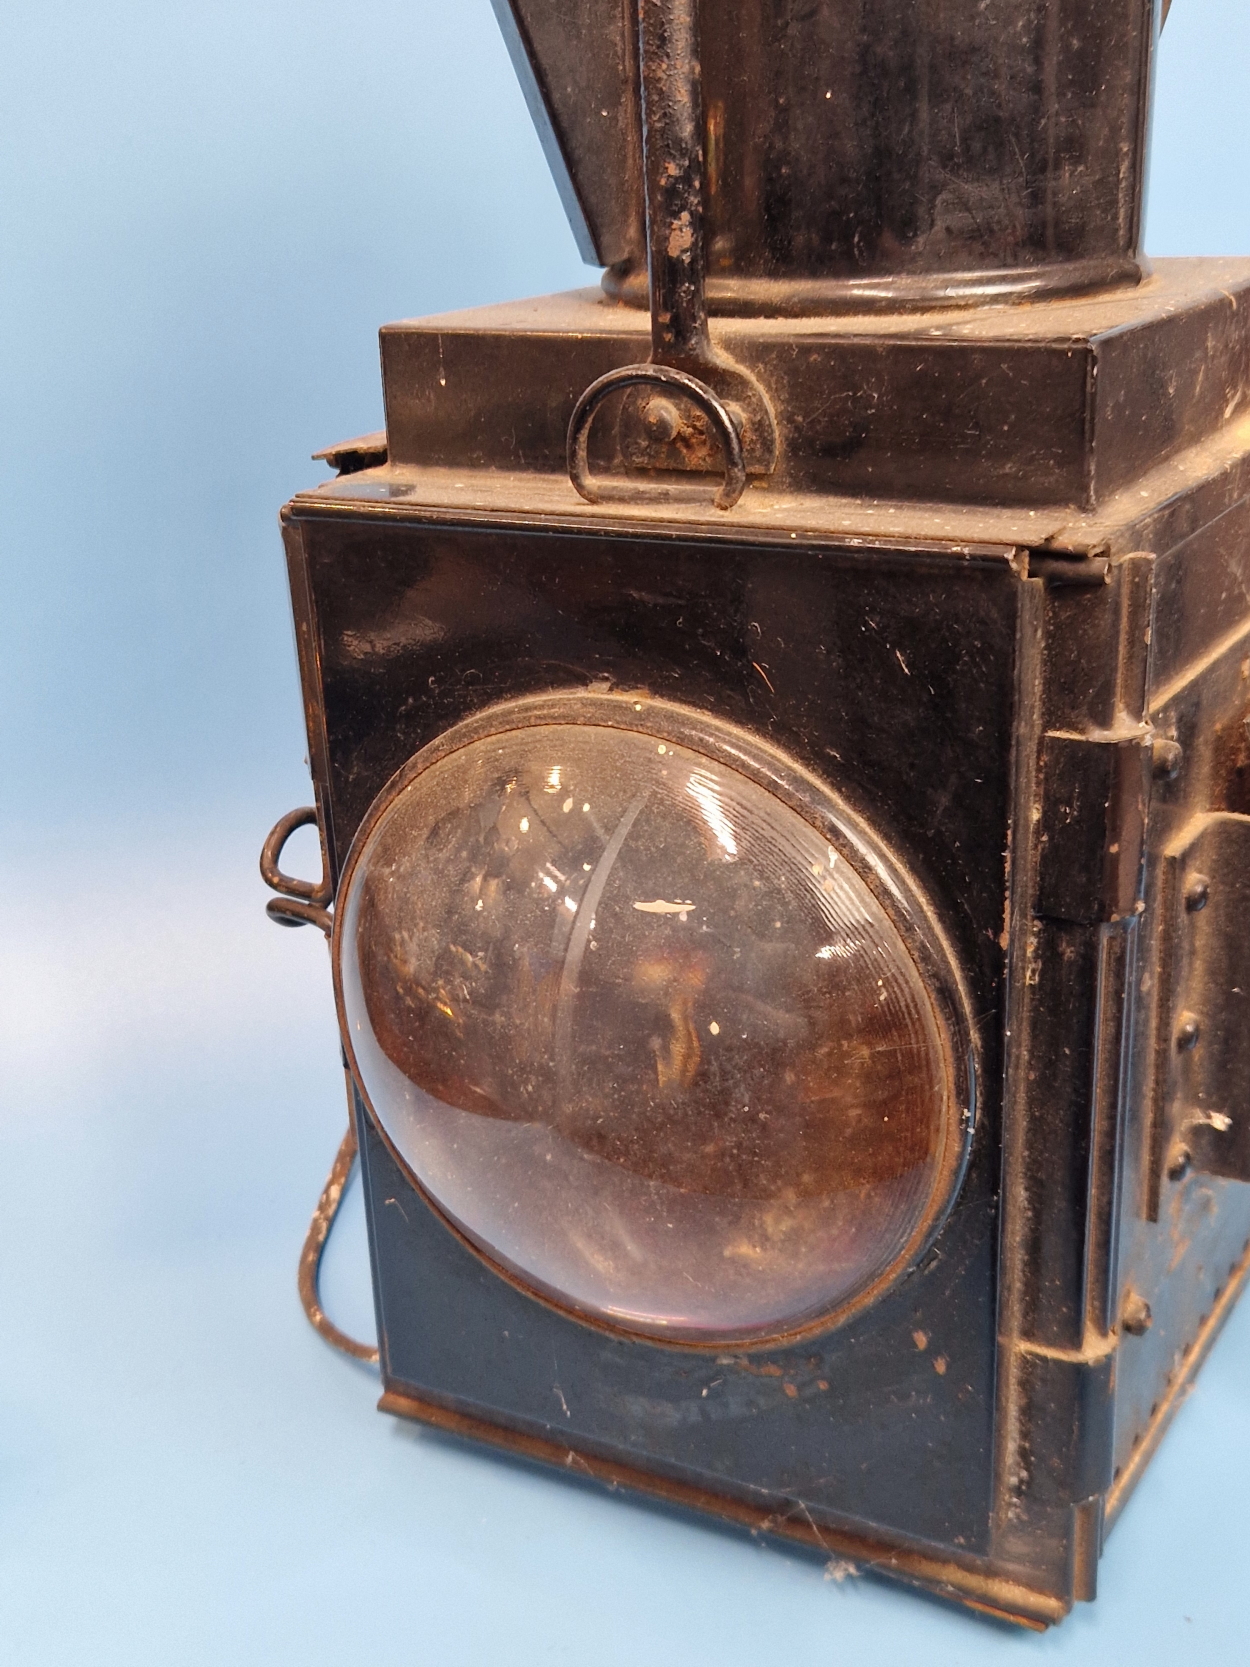 A BRITISH RAIL LANTERN WITH TWO WINDOWS OF CLEAR MAGNIFYING GLASS, NOW WITH AN ELECTRIC LIGHT - Image 2 of 3